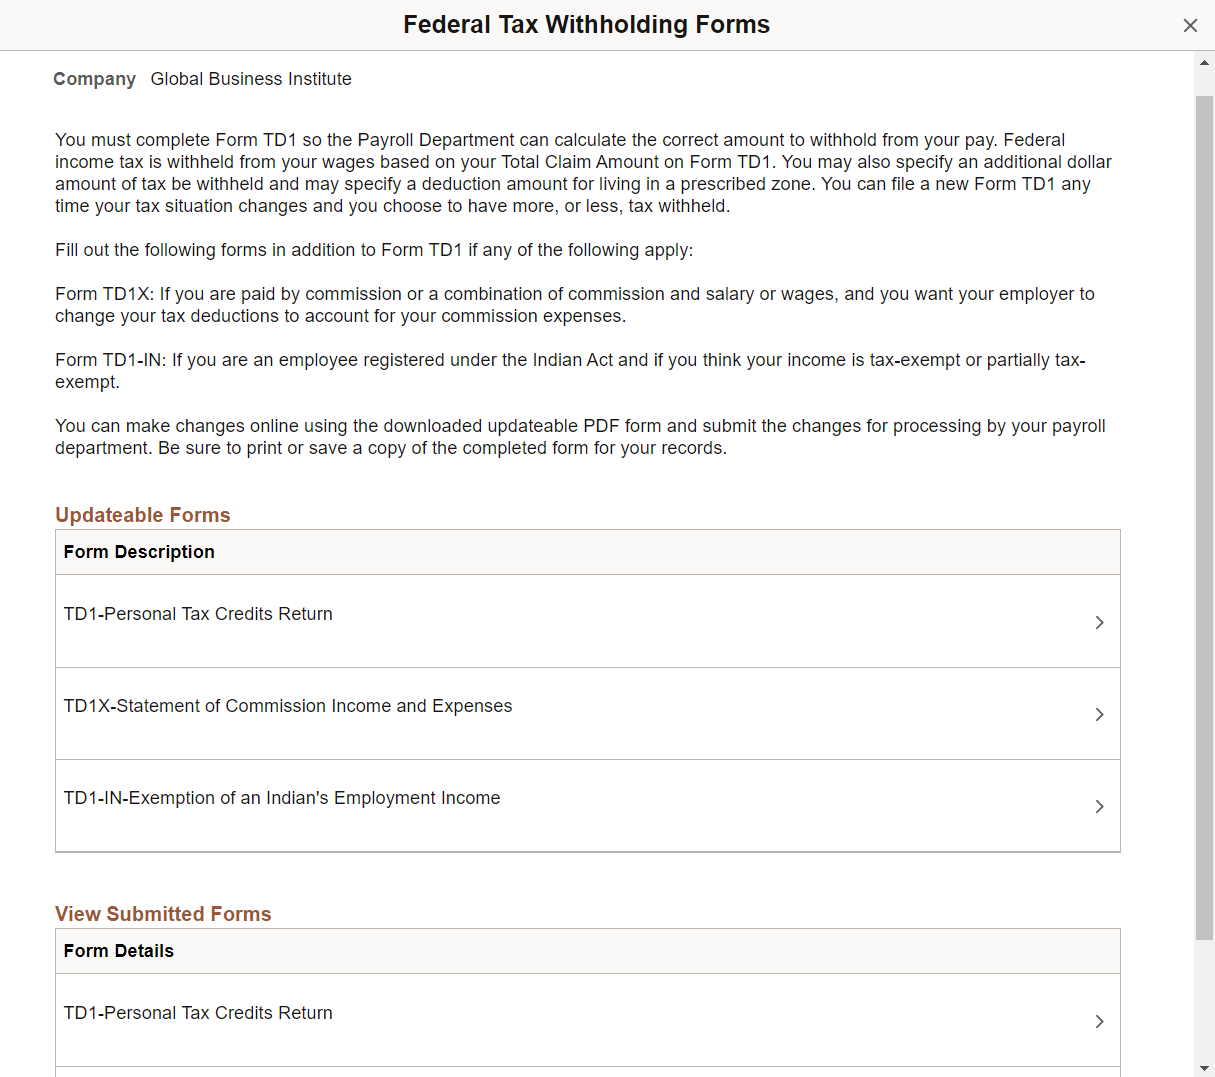 (CAN) Federal Tax Withholding Forms page